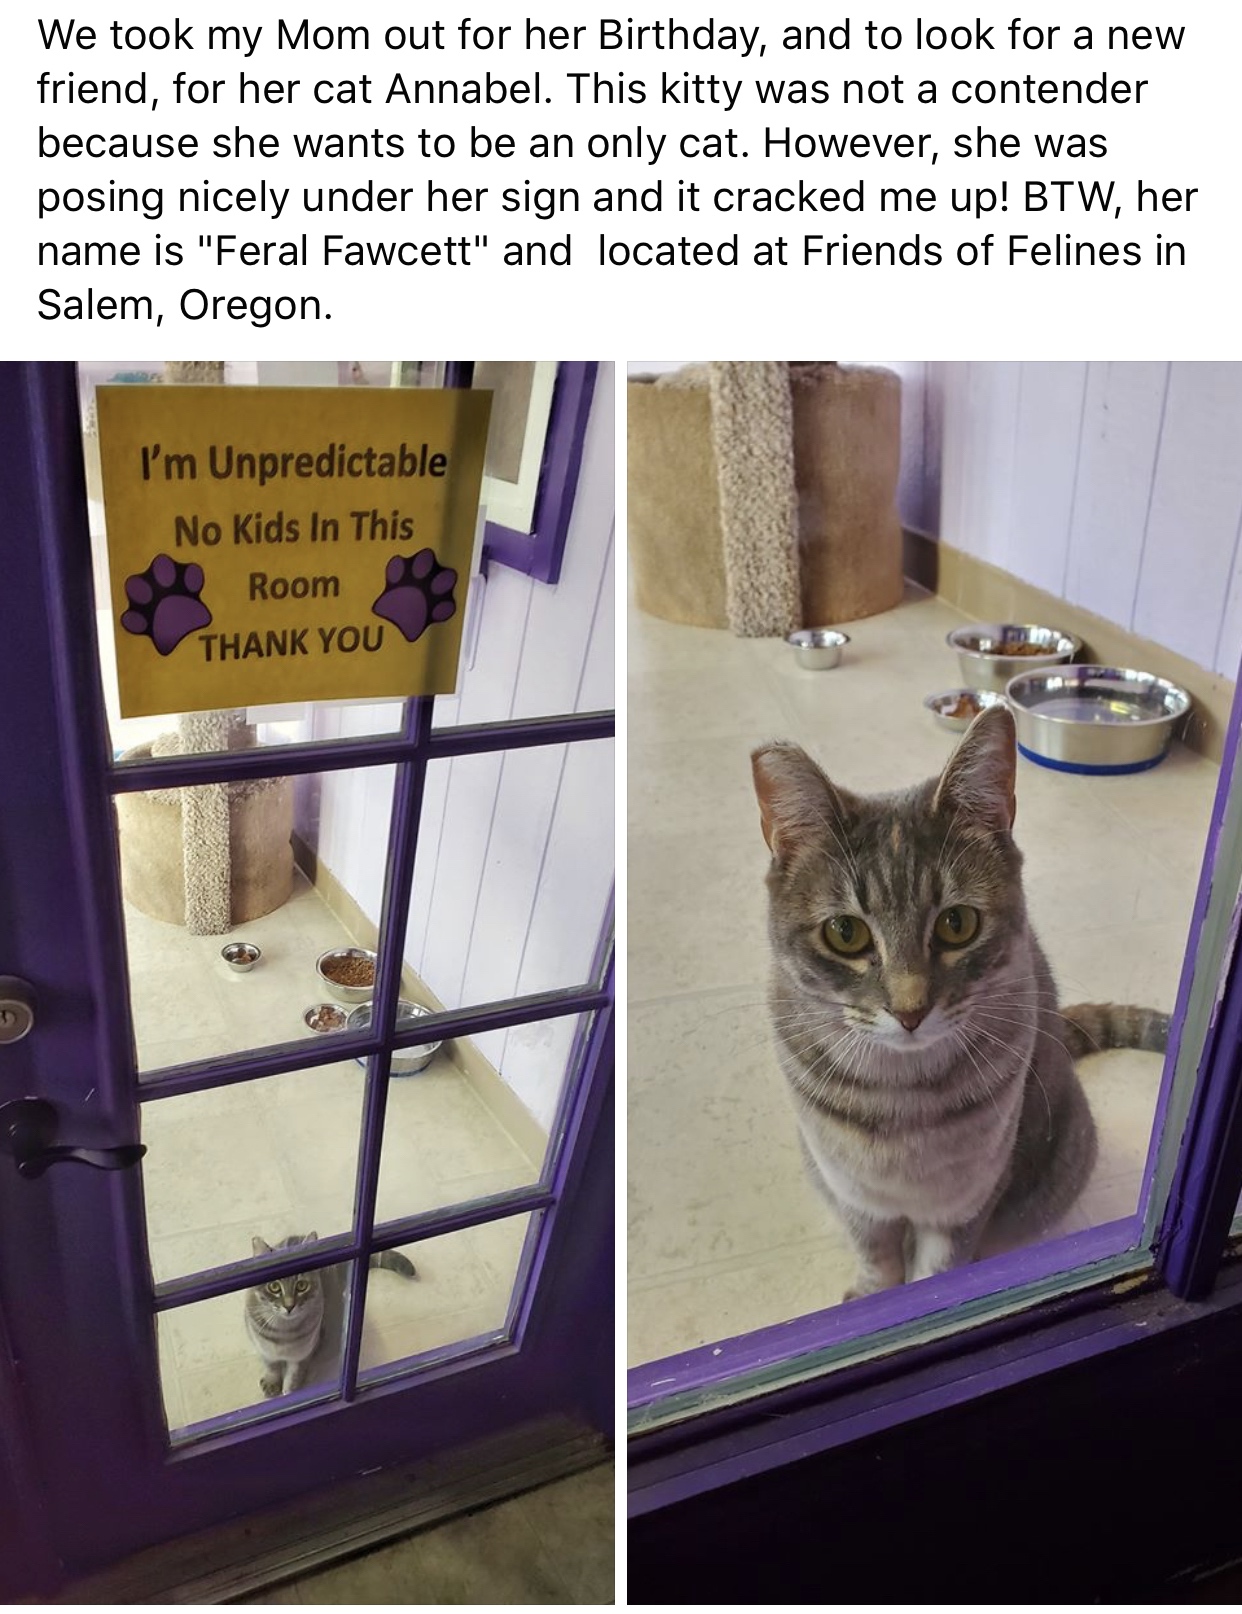 photo caption - We took my Mom out for her Birthday, and to look for a new friend, for her cat Annabel. This kitty was not a contender because she wants to be an only cat. However, she was posing nicely under her sign and it cracked me up! Btw, her name i